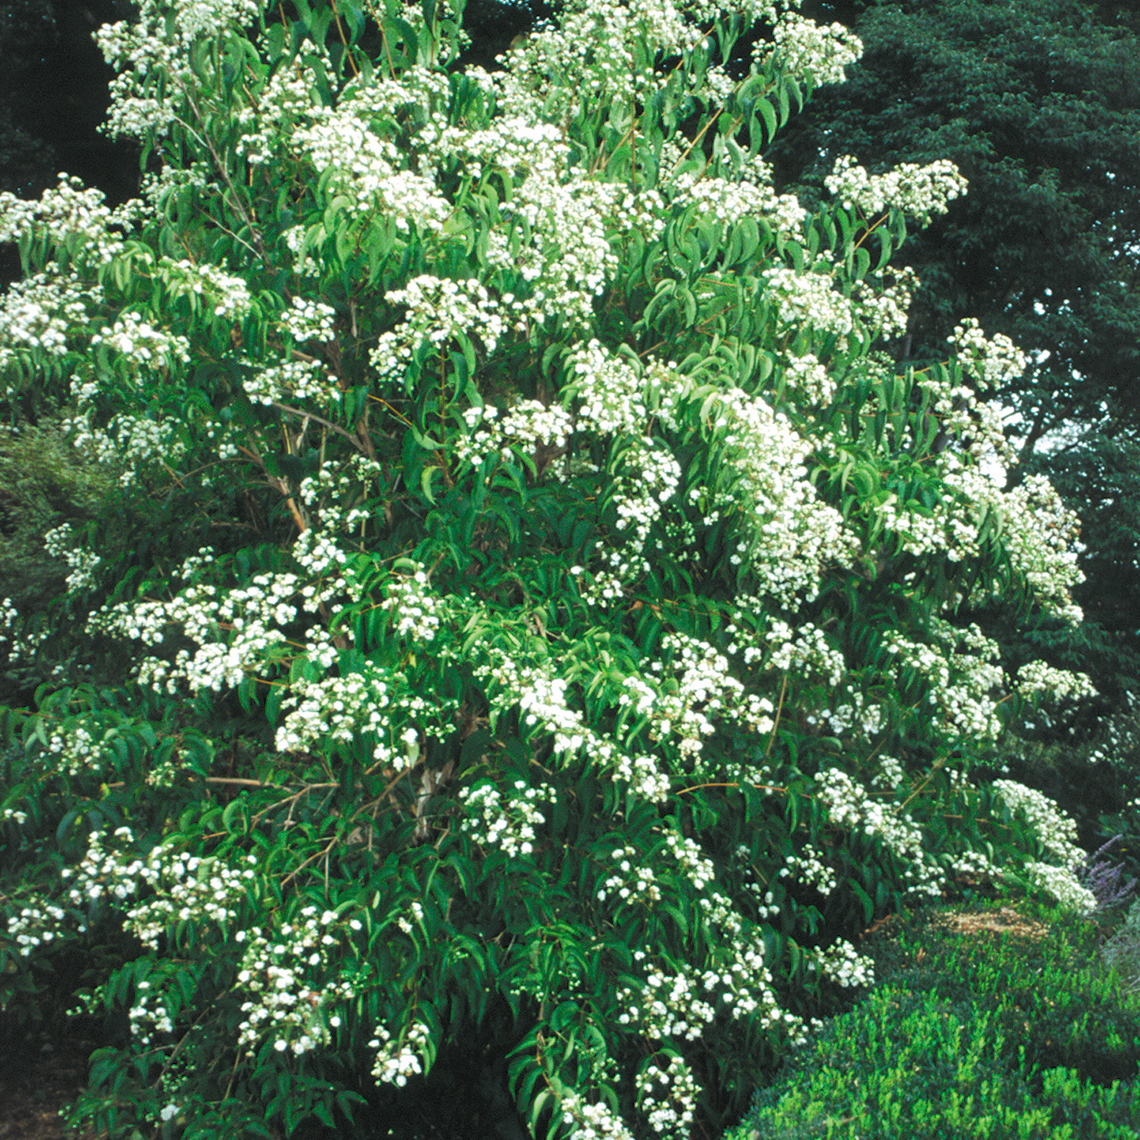 Heptacodium with white blooms in the landscape